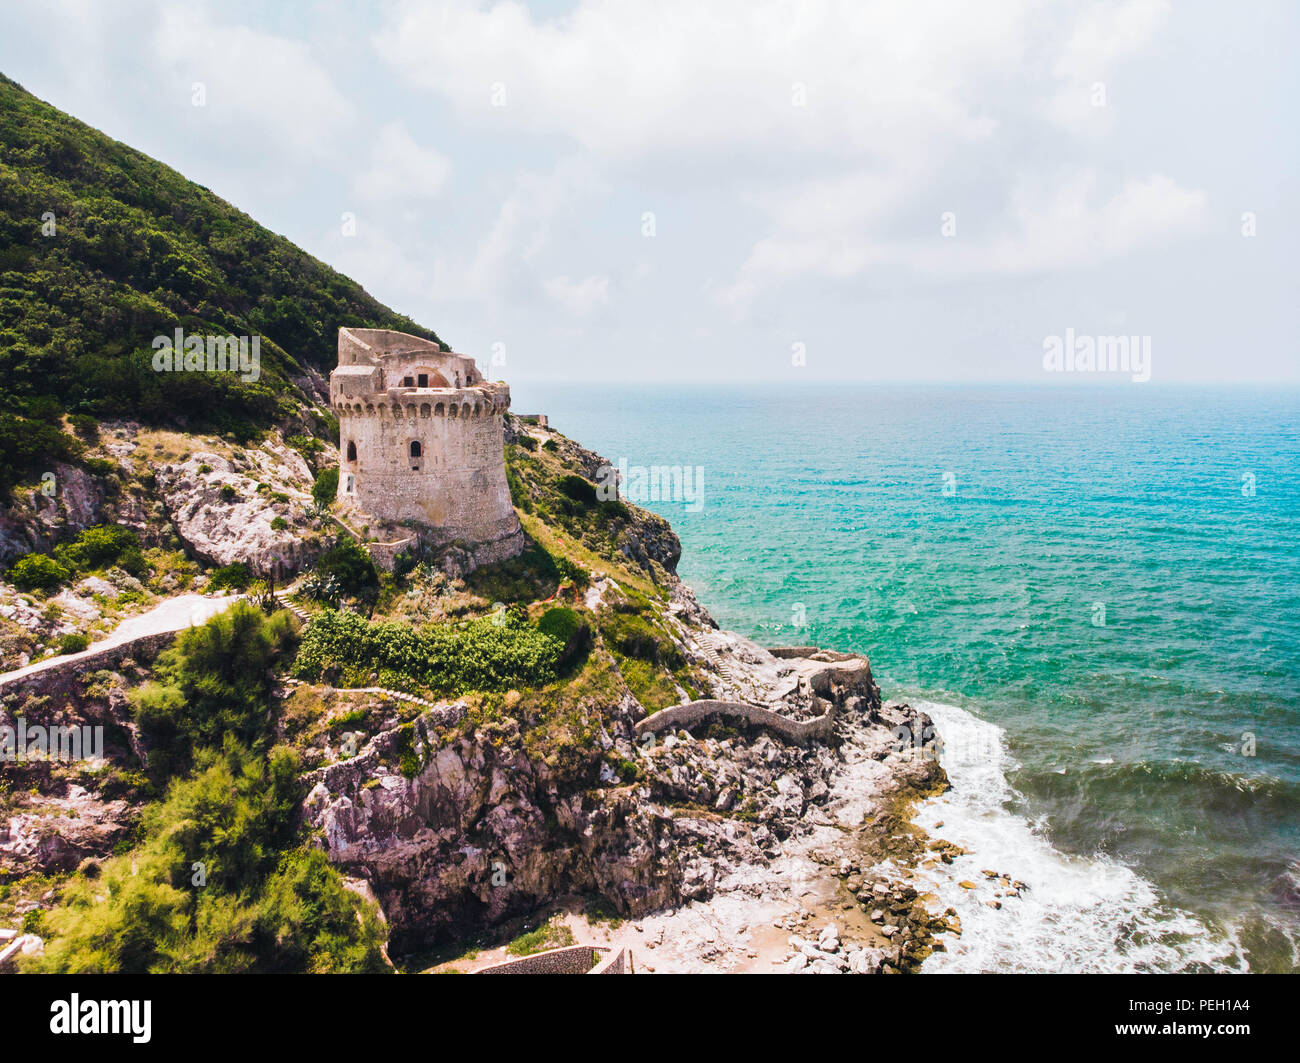 Beautiful scene, old building. Ancient defense tower on mountain in the Mediterranean sea. Paola tower is placed on Circeo promontory of Sabaudia, Italy. View from drone, aerial. Stock Photo